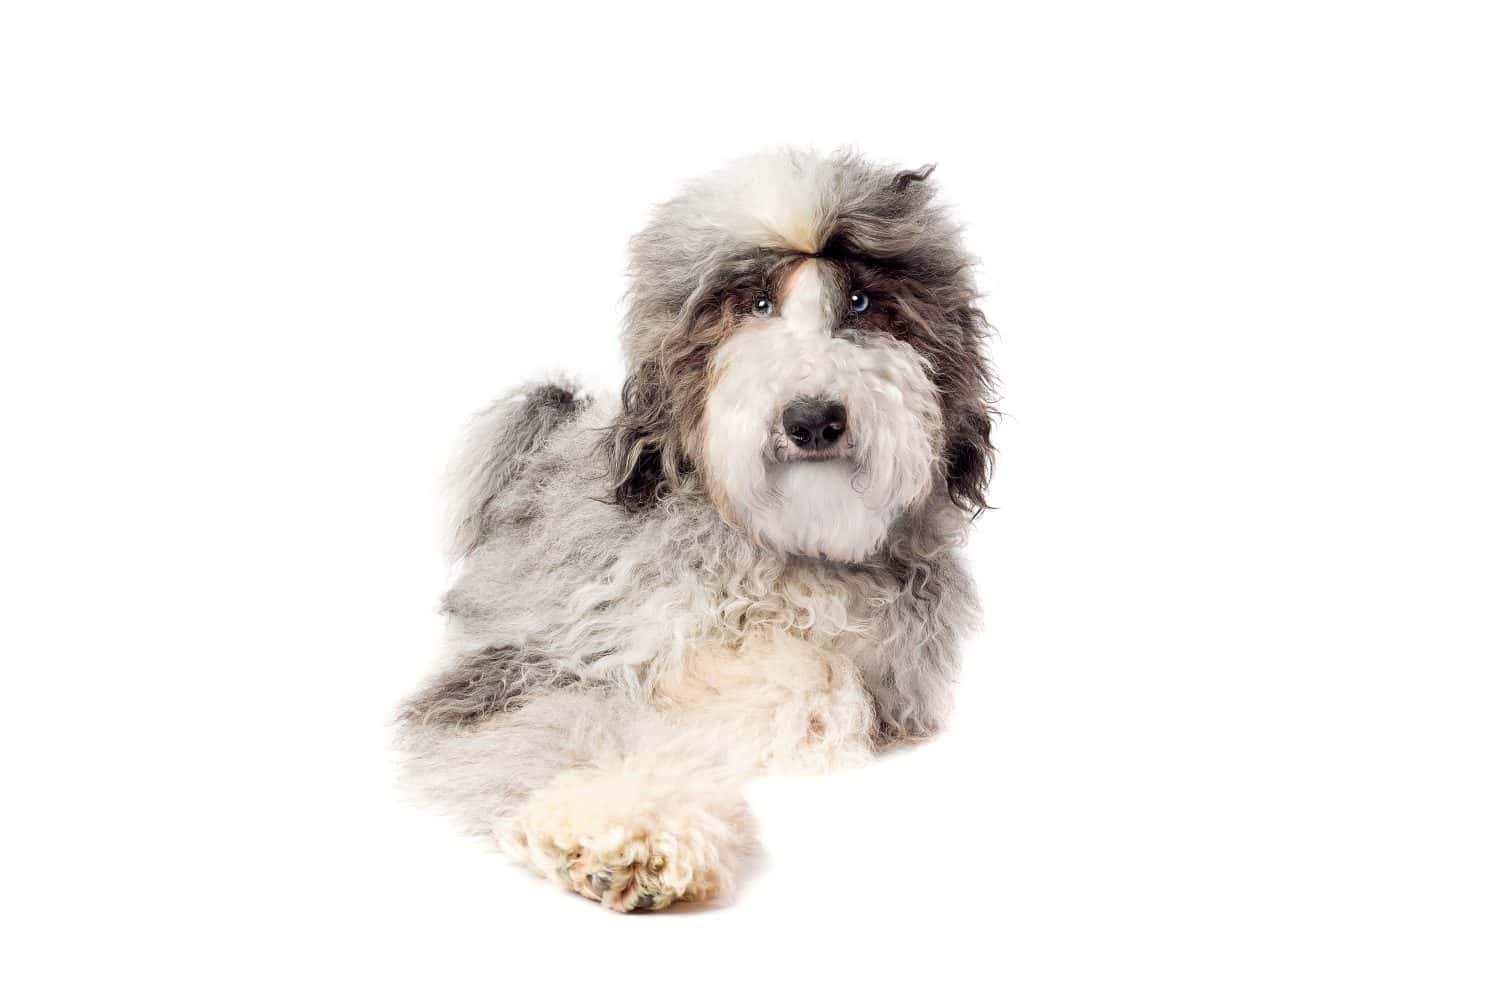 Sheepadoodle dog in front of a white background